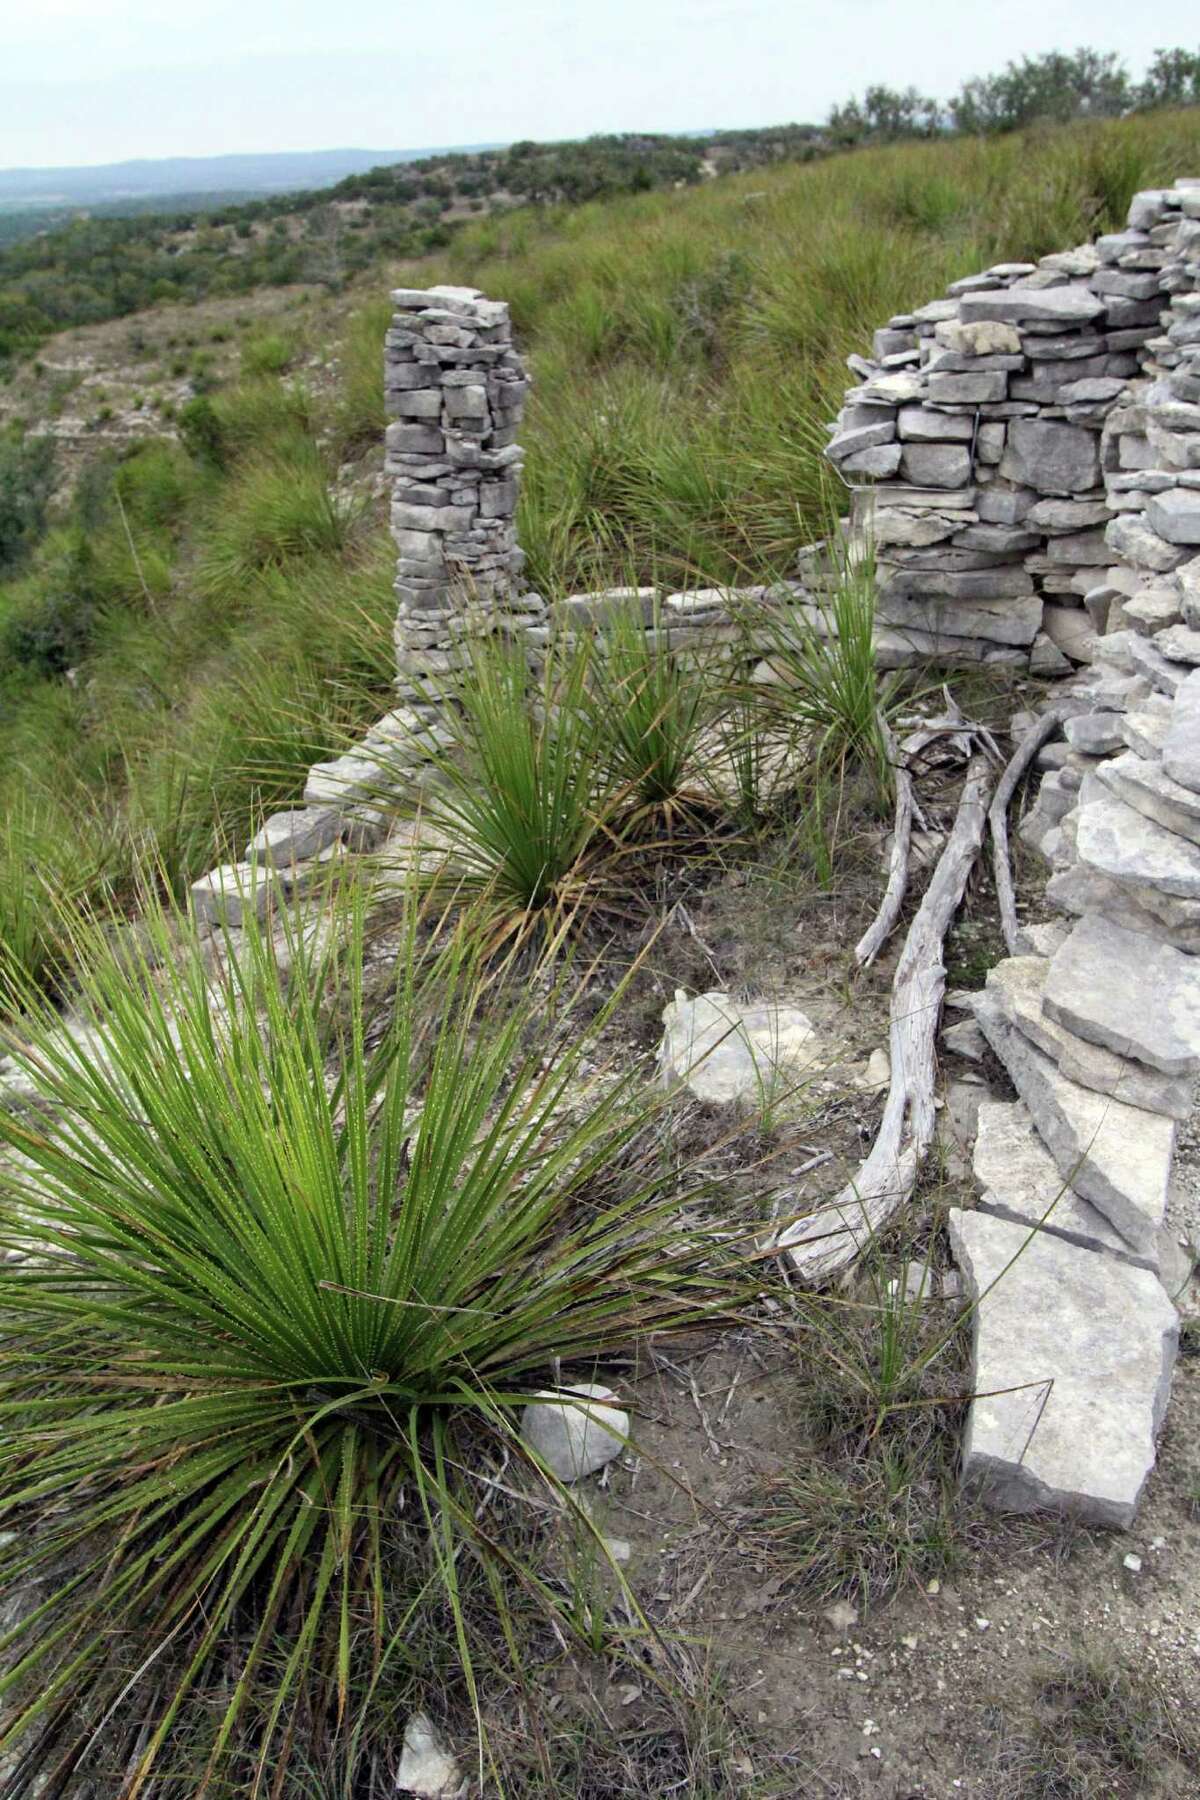 An arrangement of rocks at the top of the hill on Phil EvettÕs Blanco property.